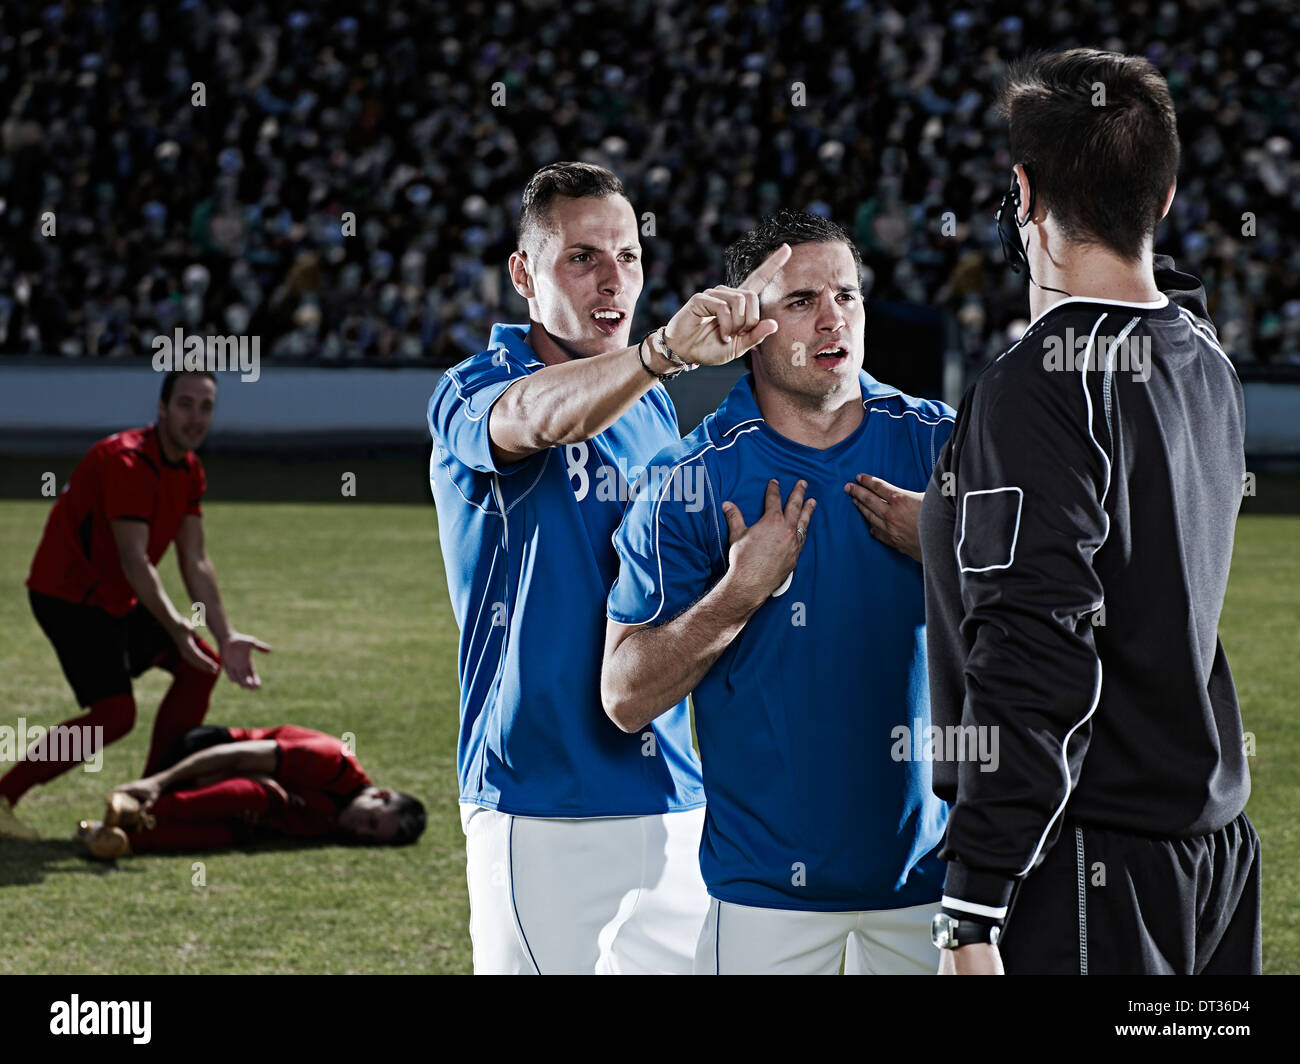 Soccer players arguing with referee on field Stock Photo